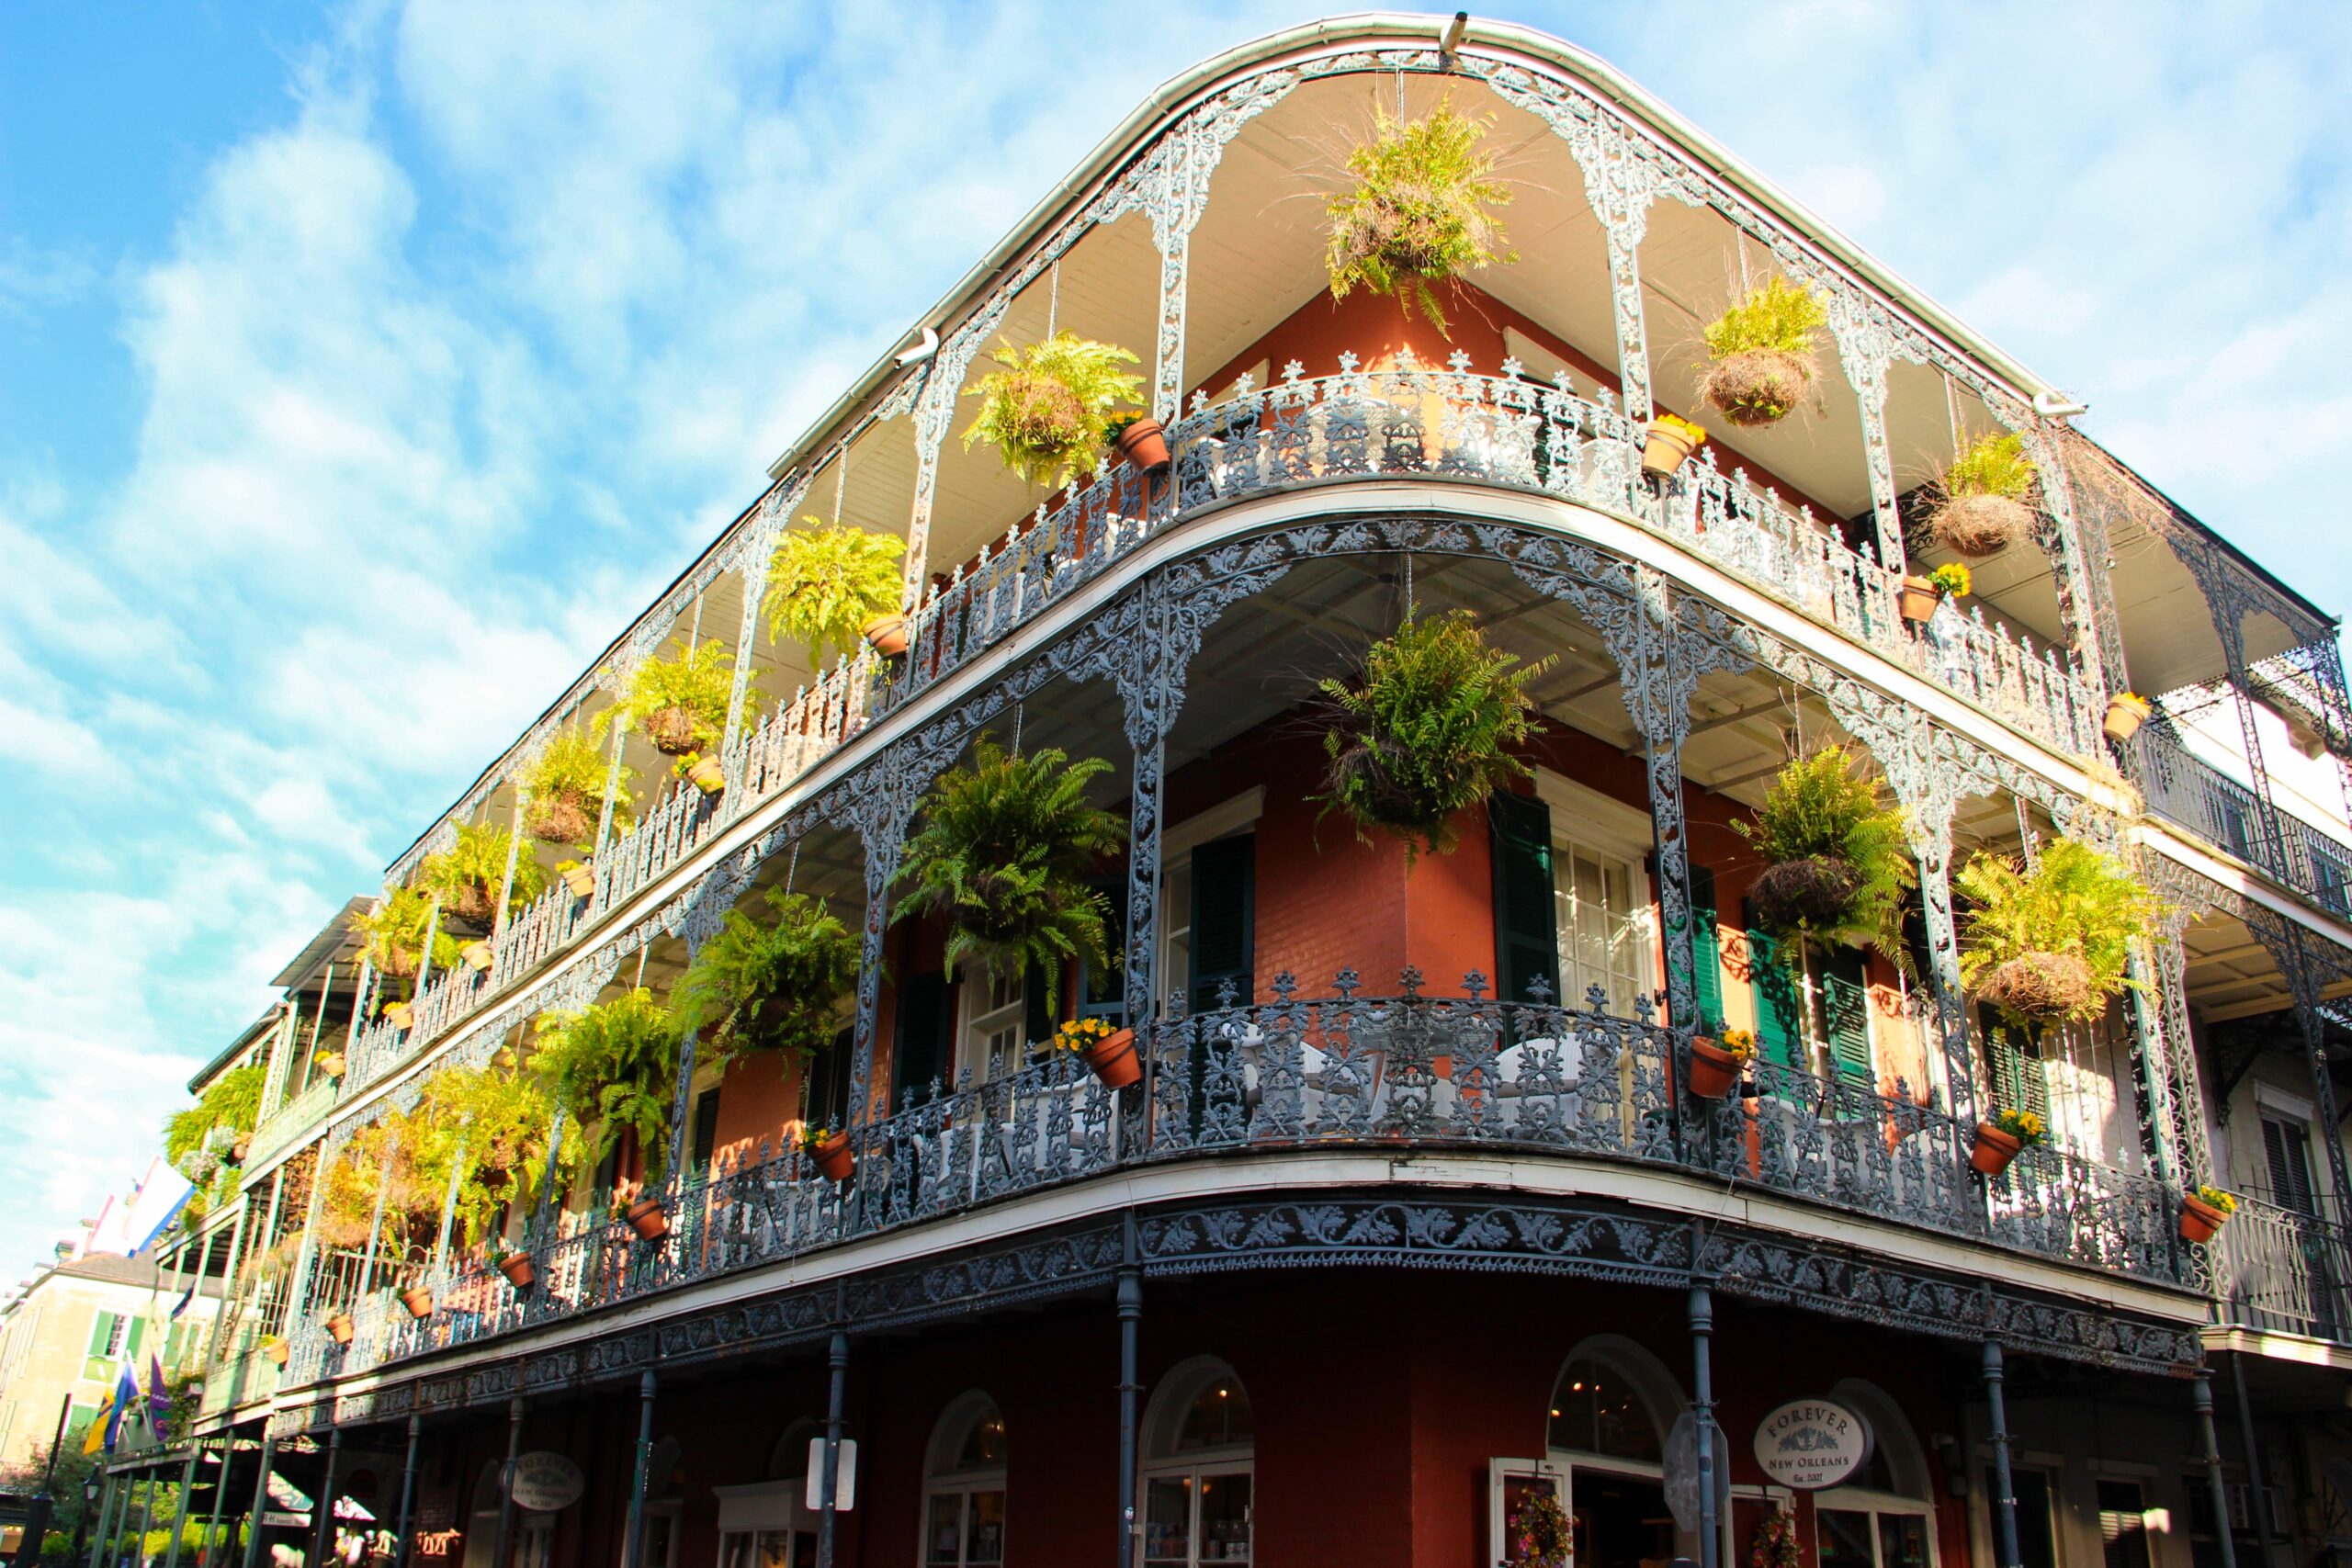 Waking up in the French Quarter